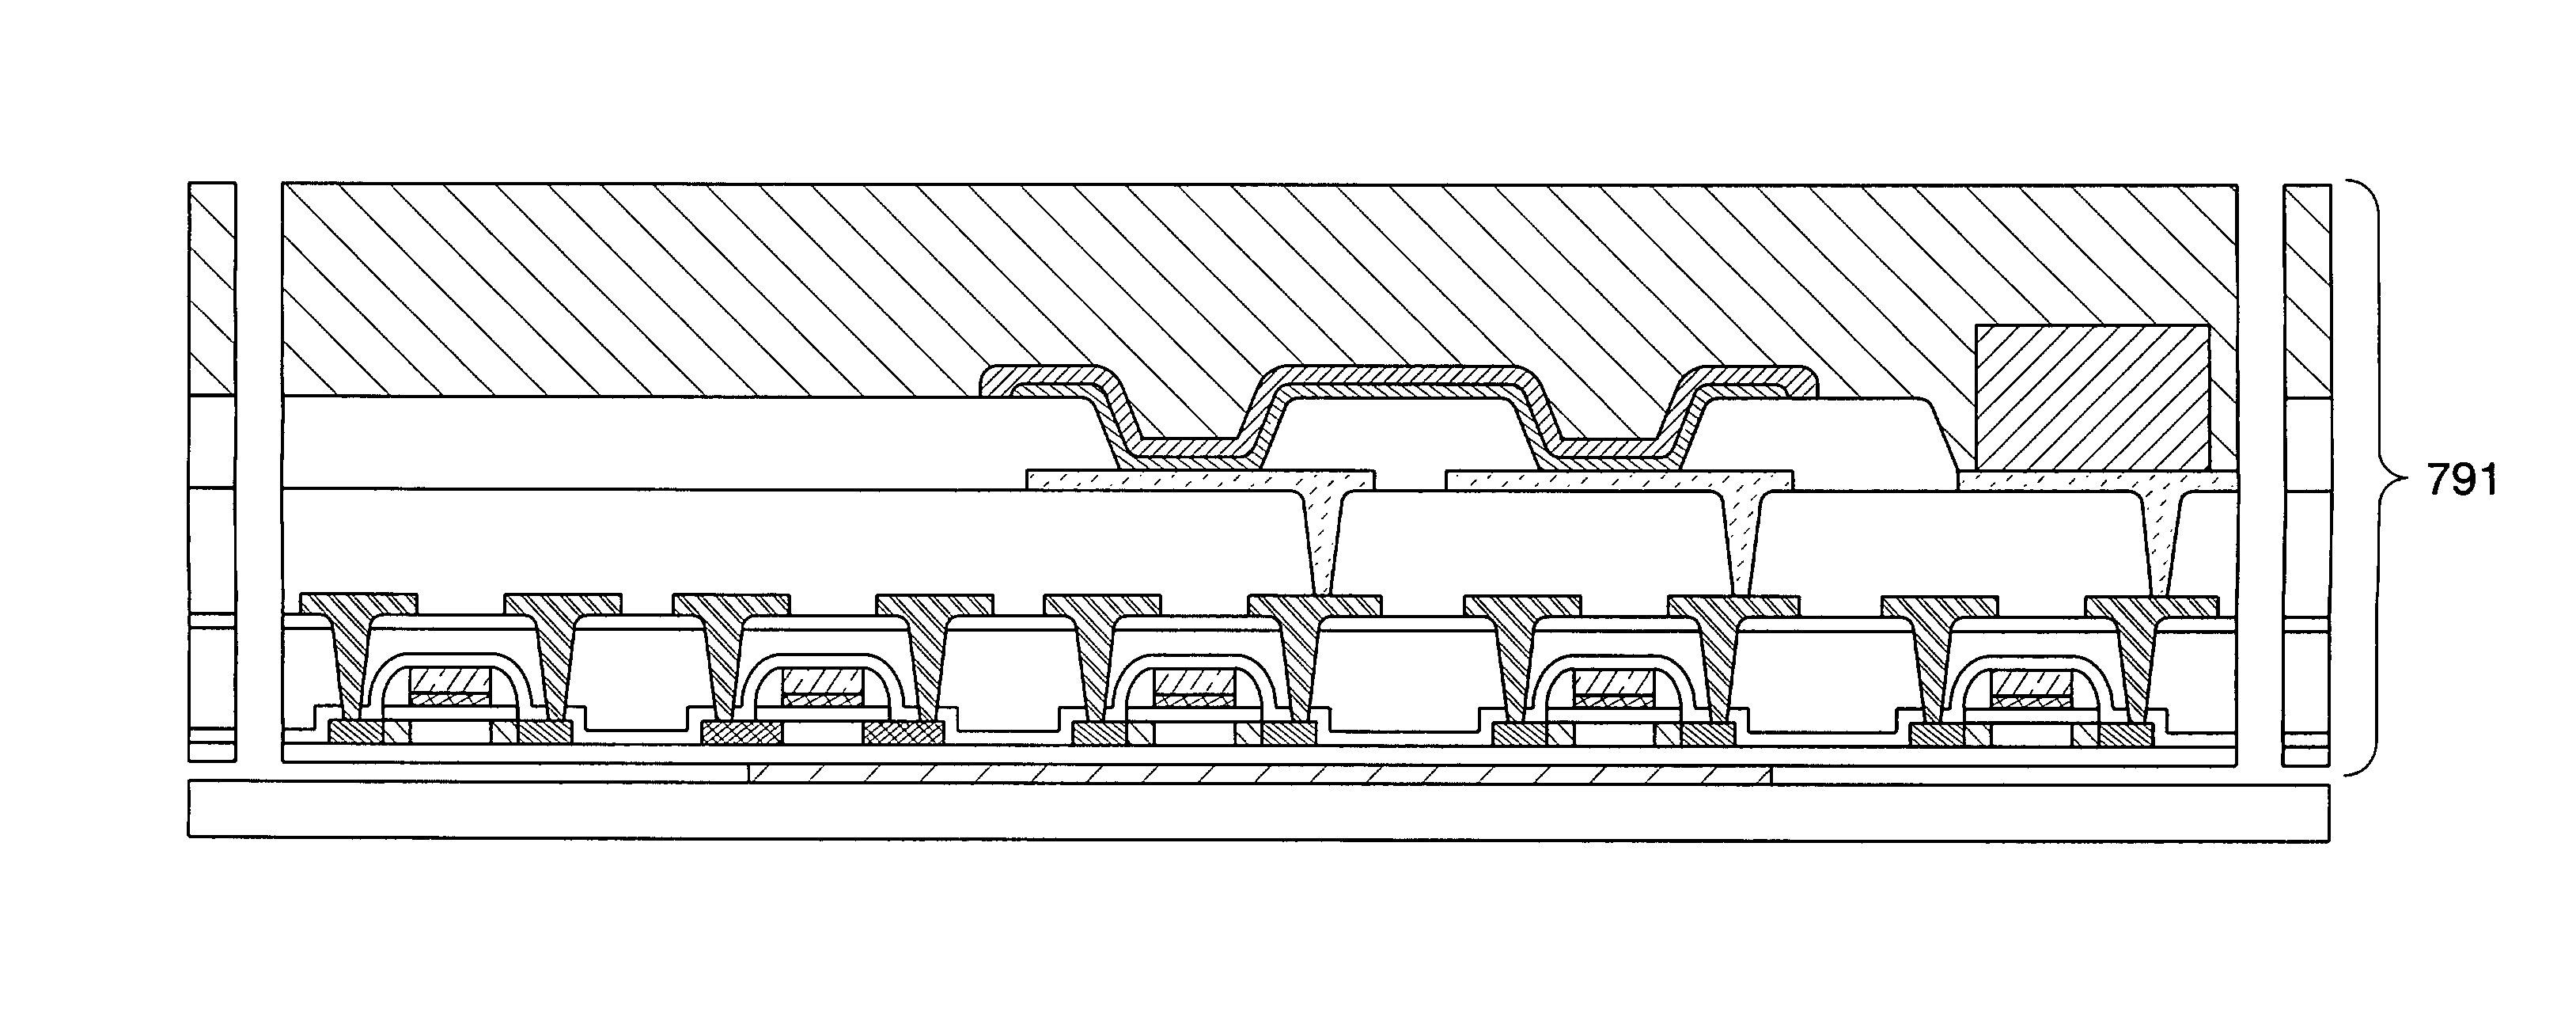 Semiconductor device including antenna